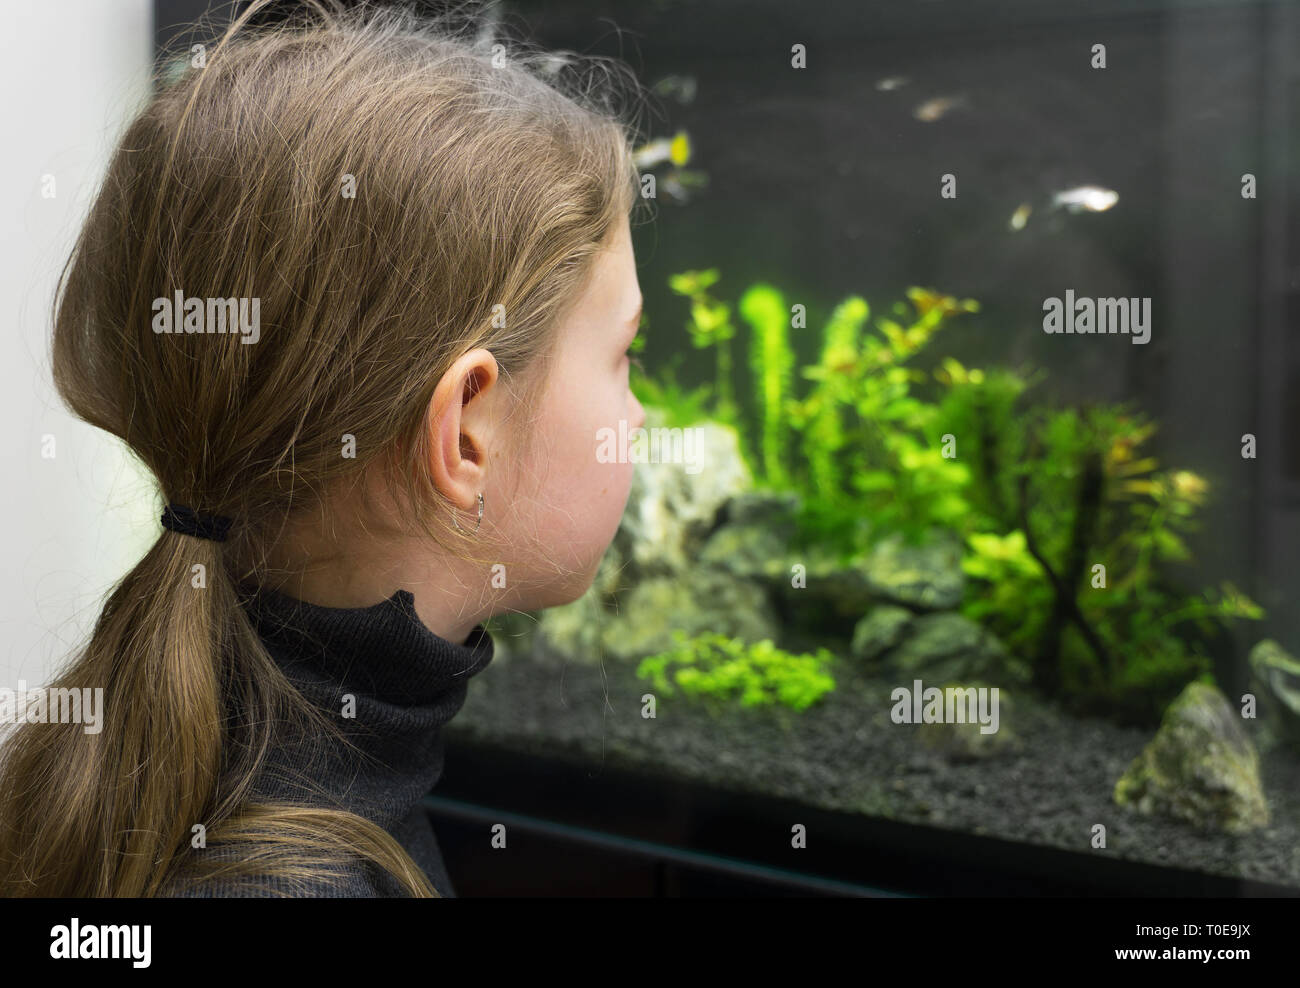 Little girl looks at the fish in the aquarium. Stock Photo